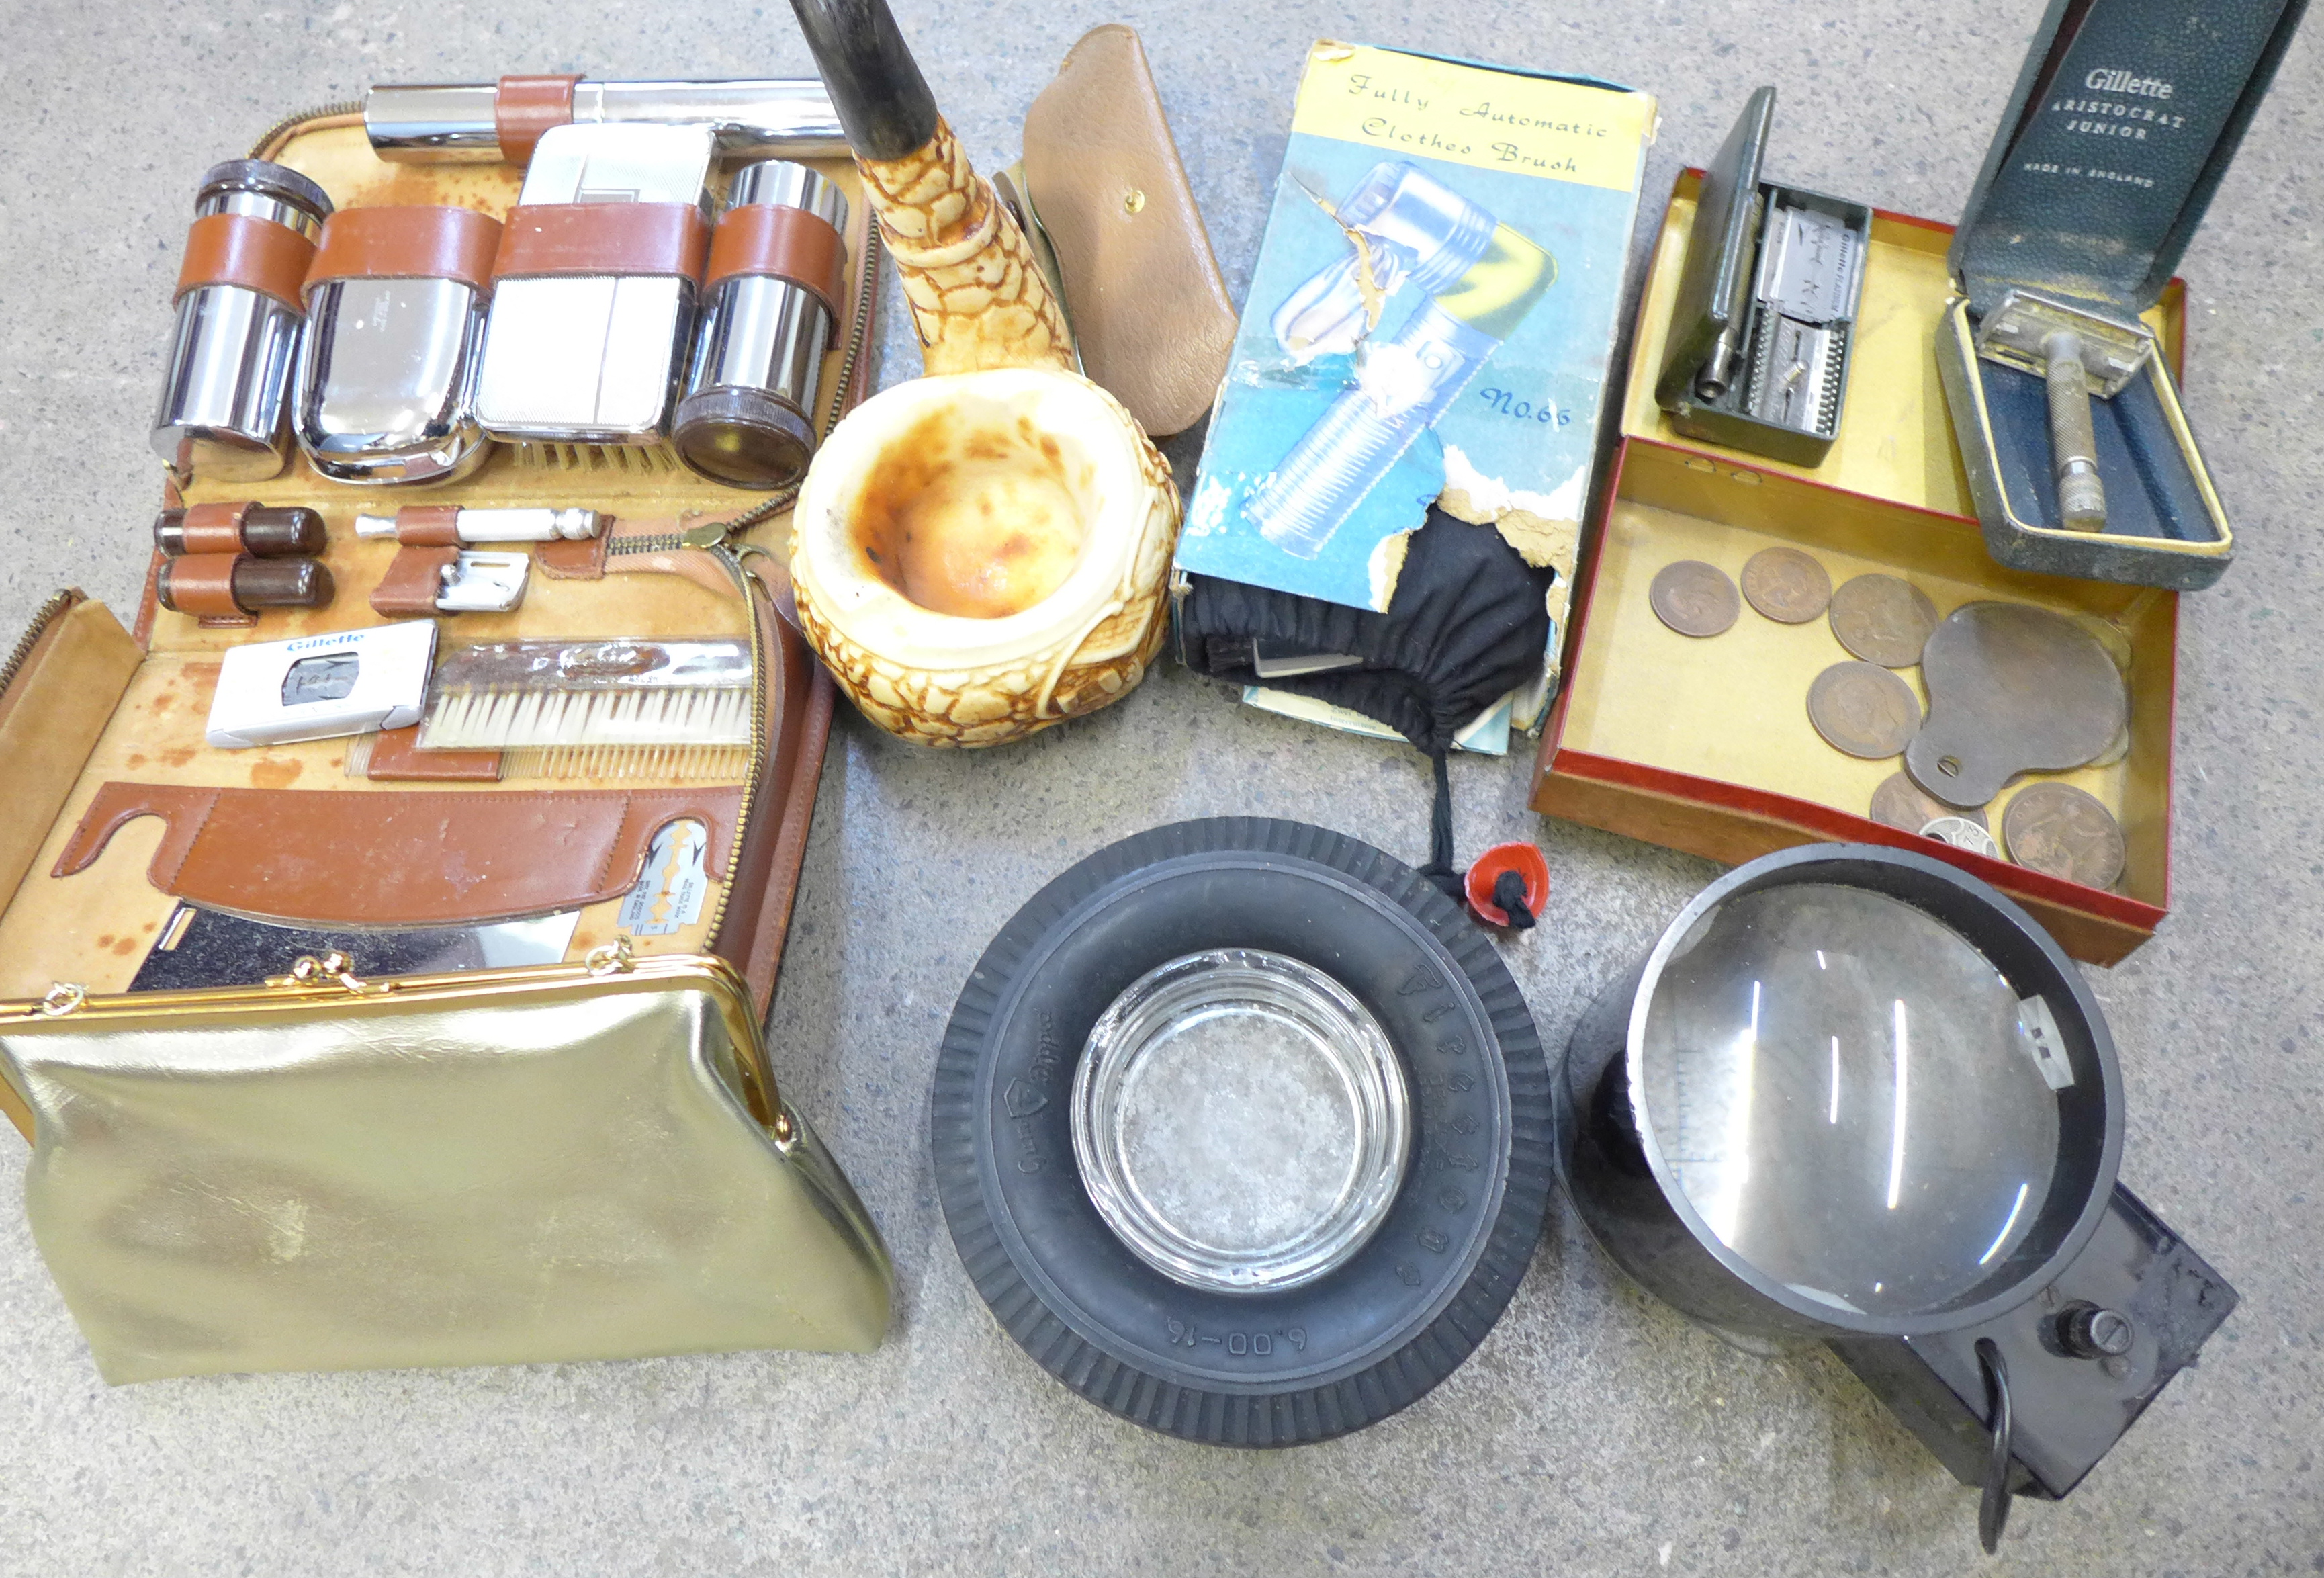 A Hohner Chromonica, a catapult, a pipe and two pipe rests, a magnifier, a gentleman's travel vanity